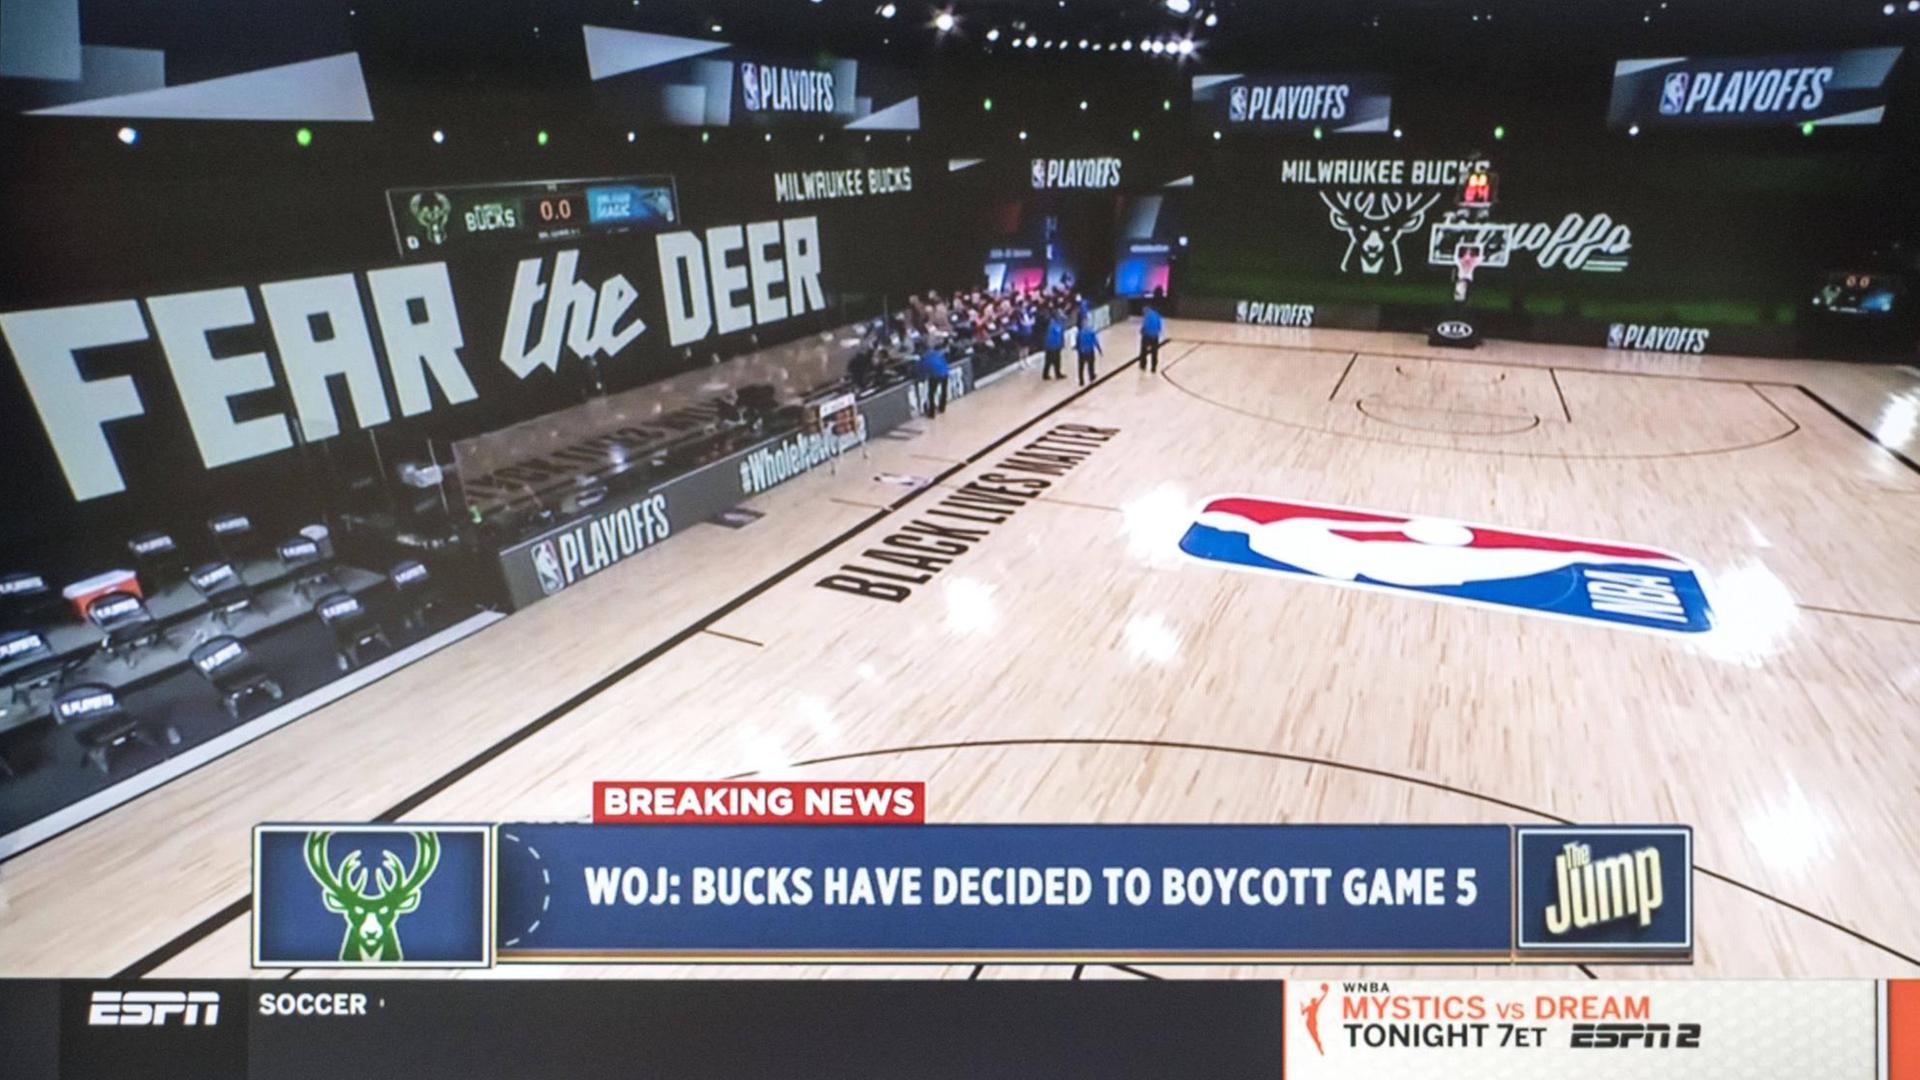 August 26, 2020, Orlando, Florida, USA - A screen grab from ESPN s coverage of the Milwaukee Bucks refusing to play today s scheduled playoff game against the Orlando Magic. After a team meeting, the Bucks decided to boycott their game in the wake of the shooting of yet another Black man, Jacob Blake, at the hands of a white policeman, this time in Kenosha, Wisconsin. After the Bucks declined to play, the Rockets also decided to boycott. Other teams have now joined the boycott, and no playoff games will be played tonight. Orlando U.S. - ZUMAce6_ 20200826_zaf_ce6_001 Copyright: xCourtesyxEspnx